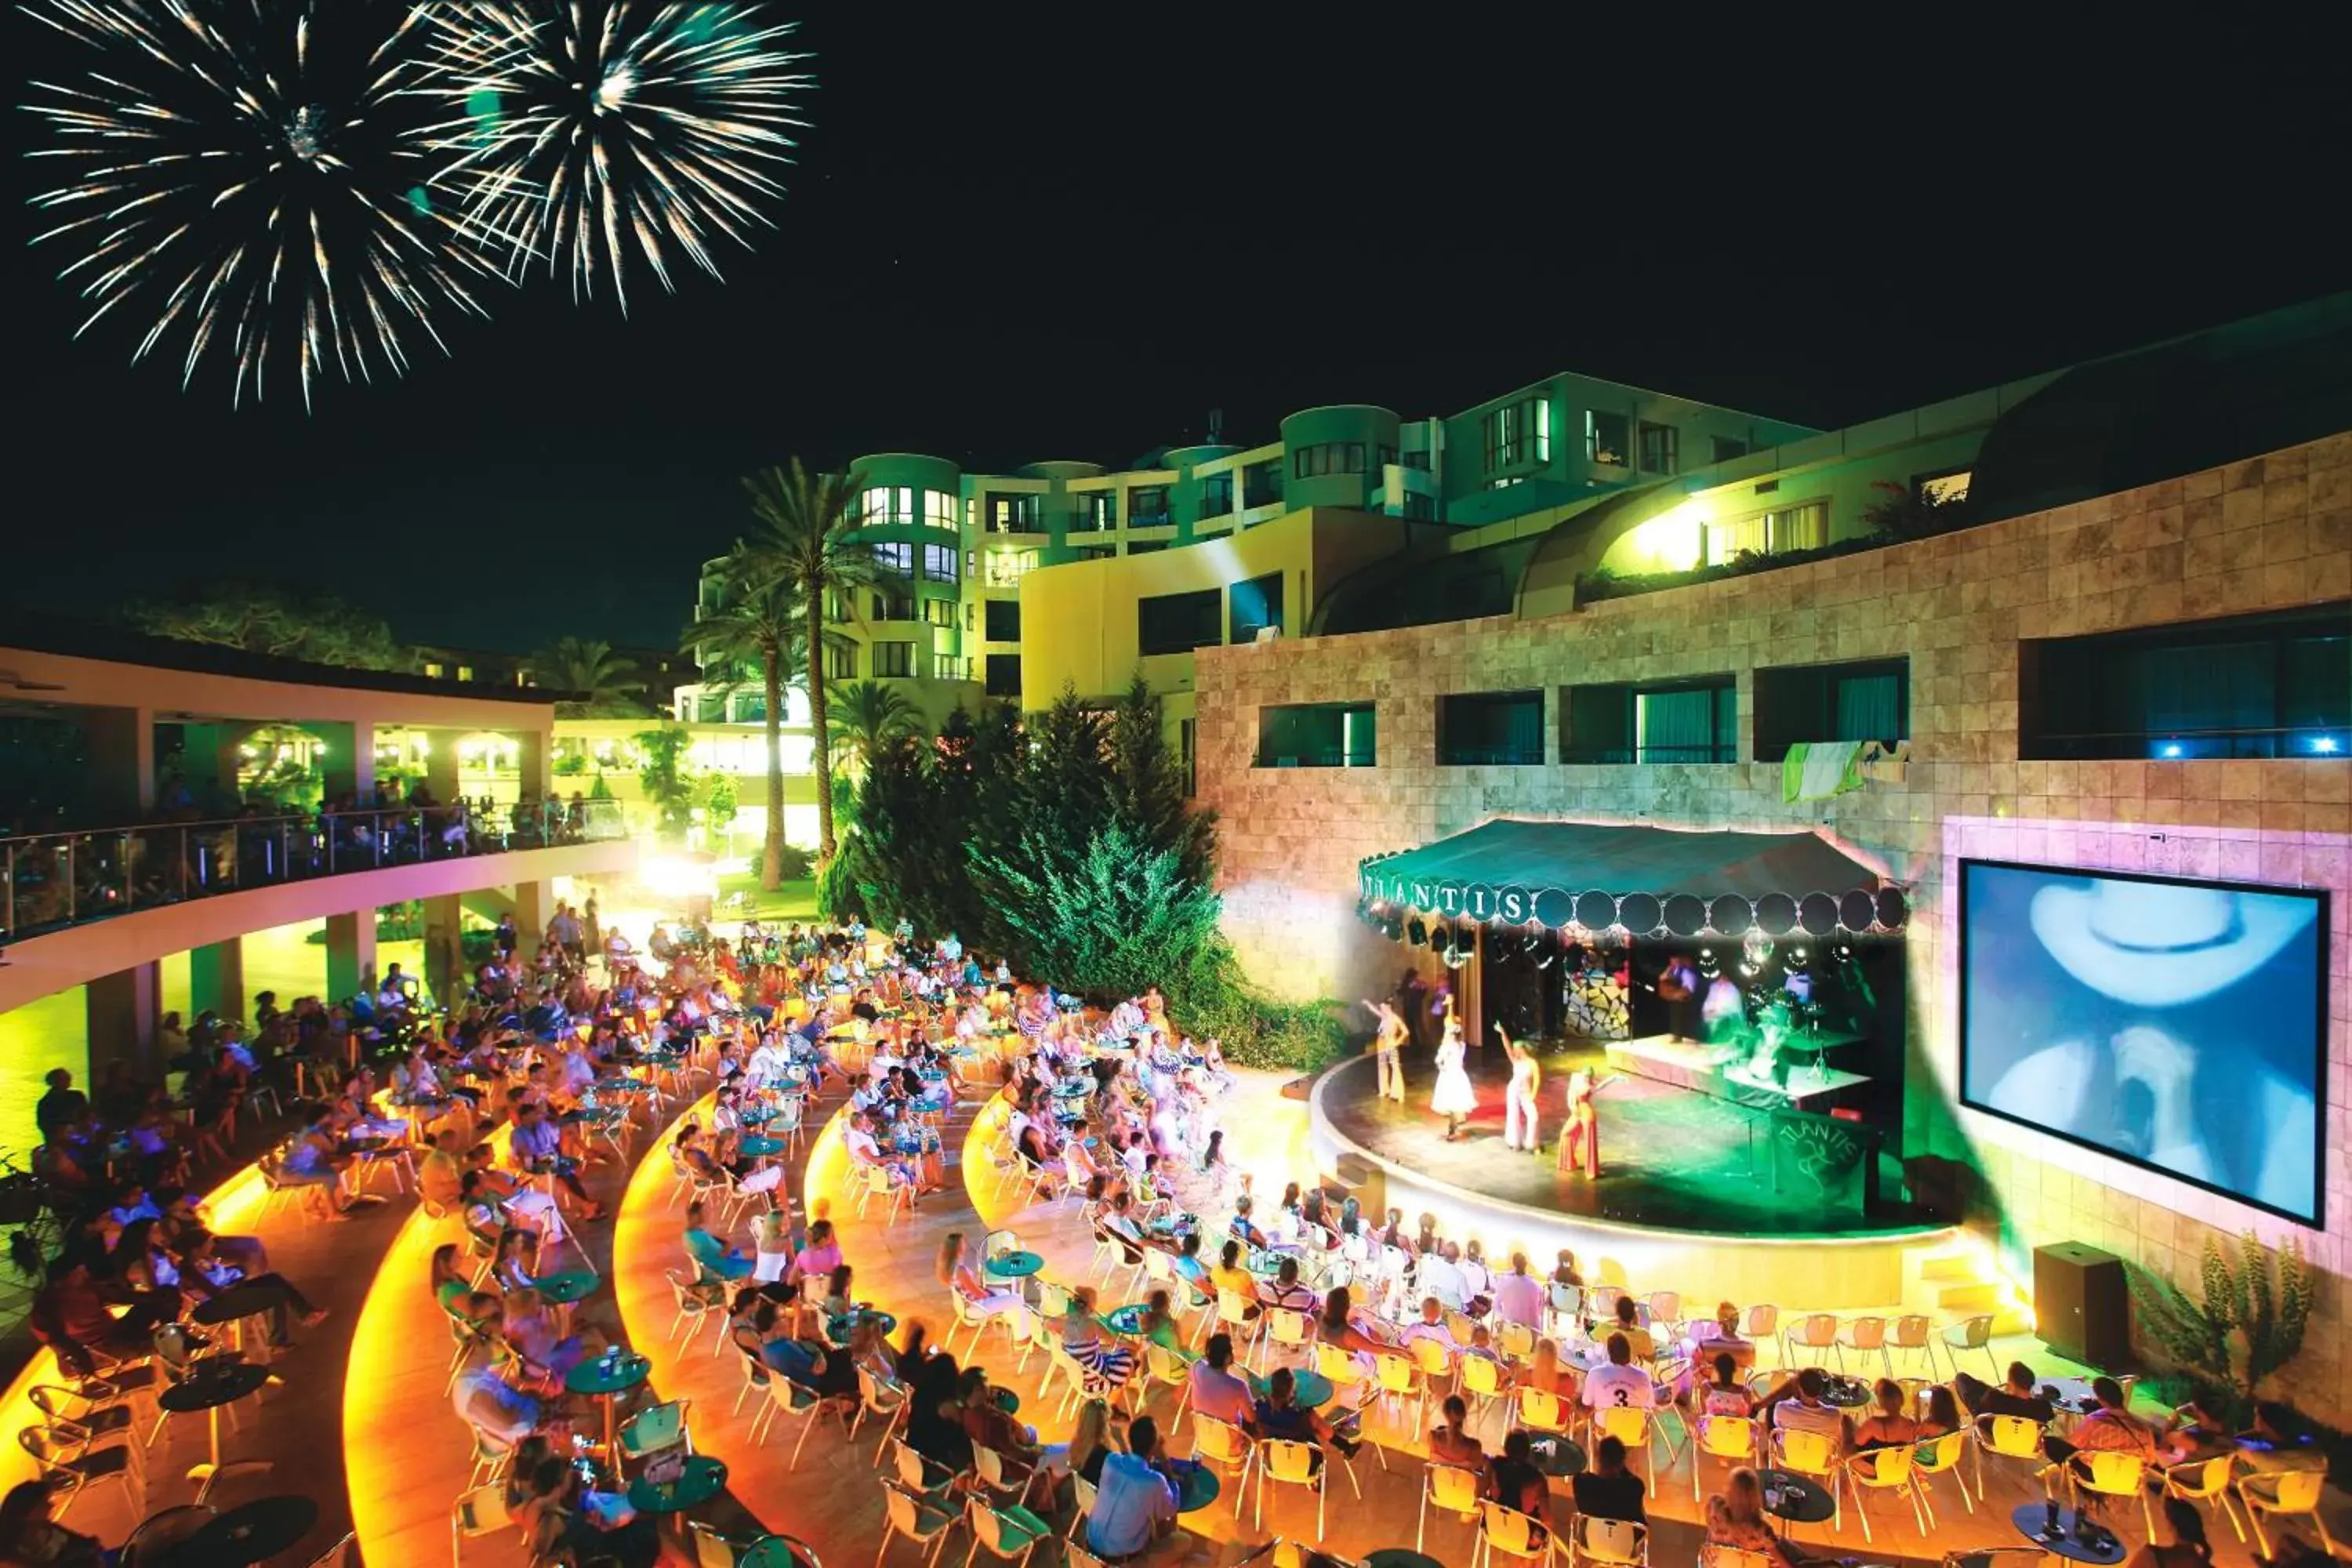 Evening entertainment in Limak Atlantis Deluxe Hotel-2 Children Free up to Age 14